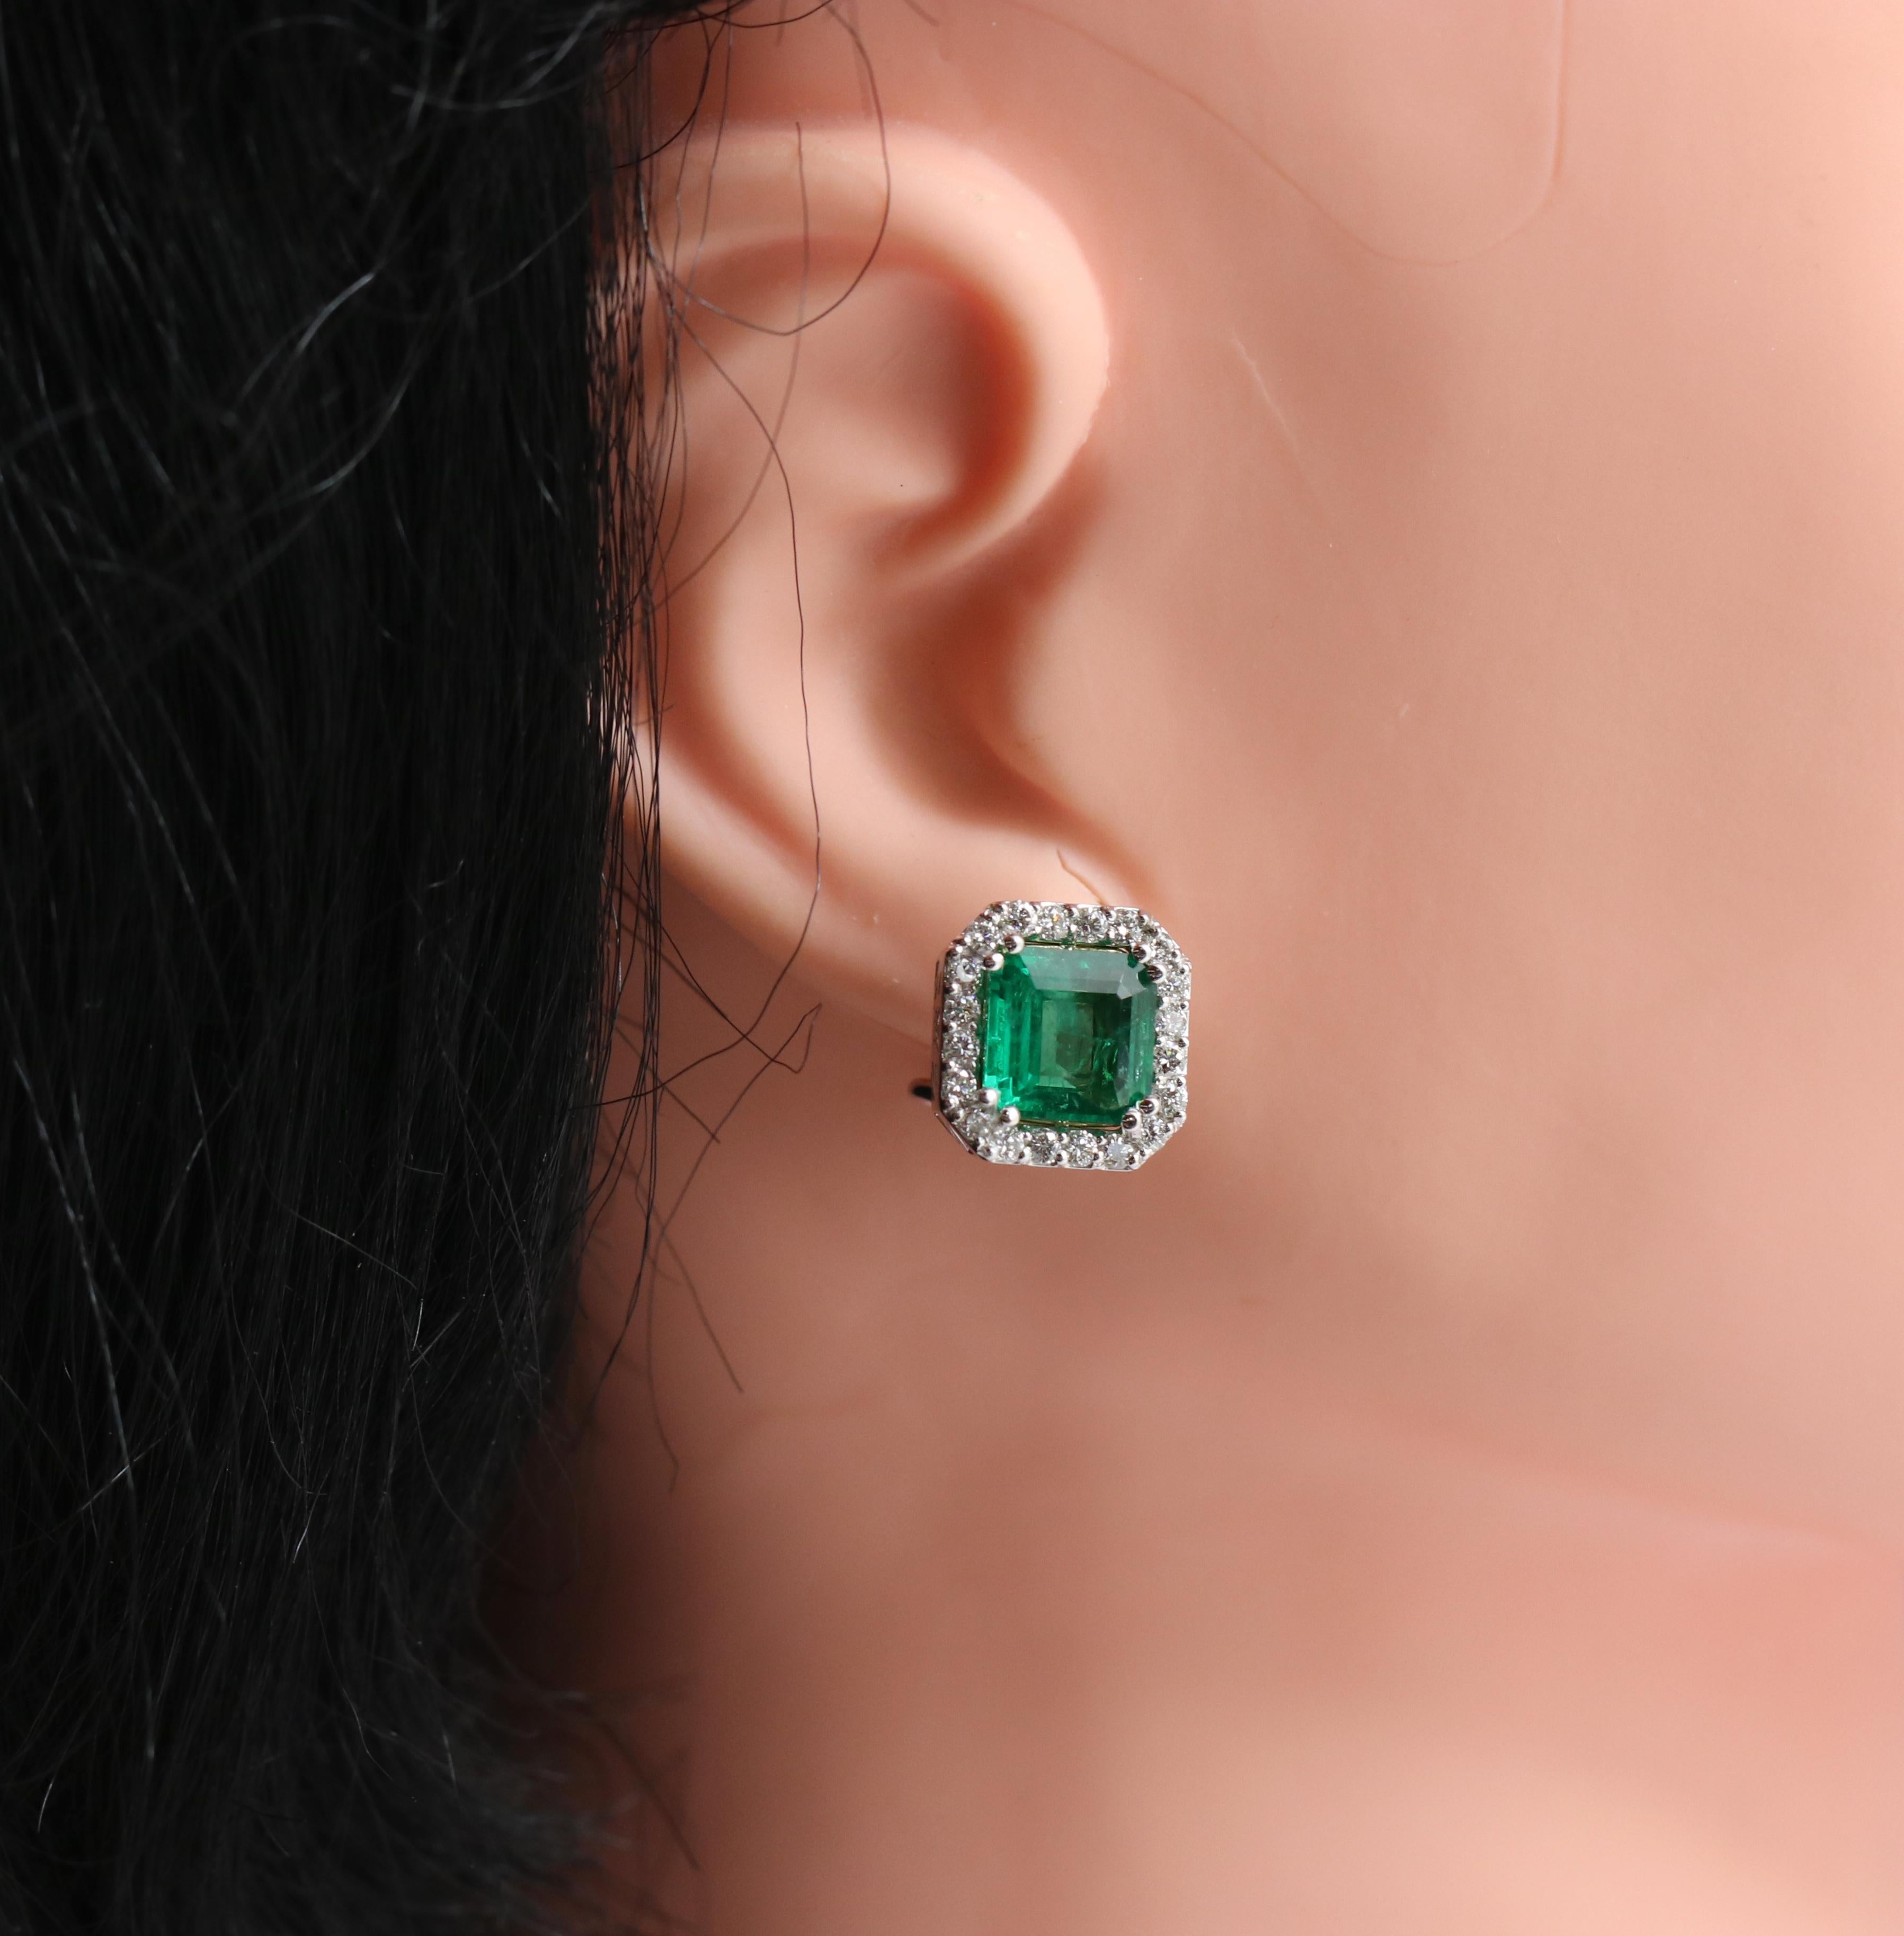 White Gold Zambian Emerald and Diamond Earrings with AGL Certificate 2